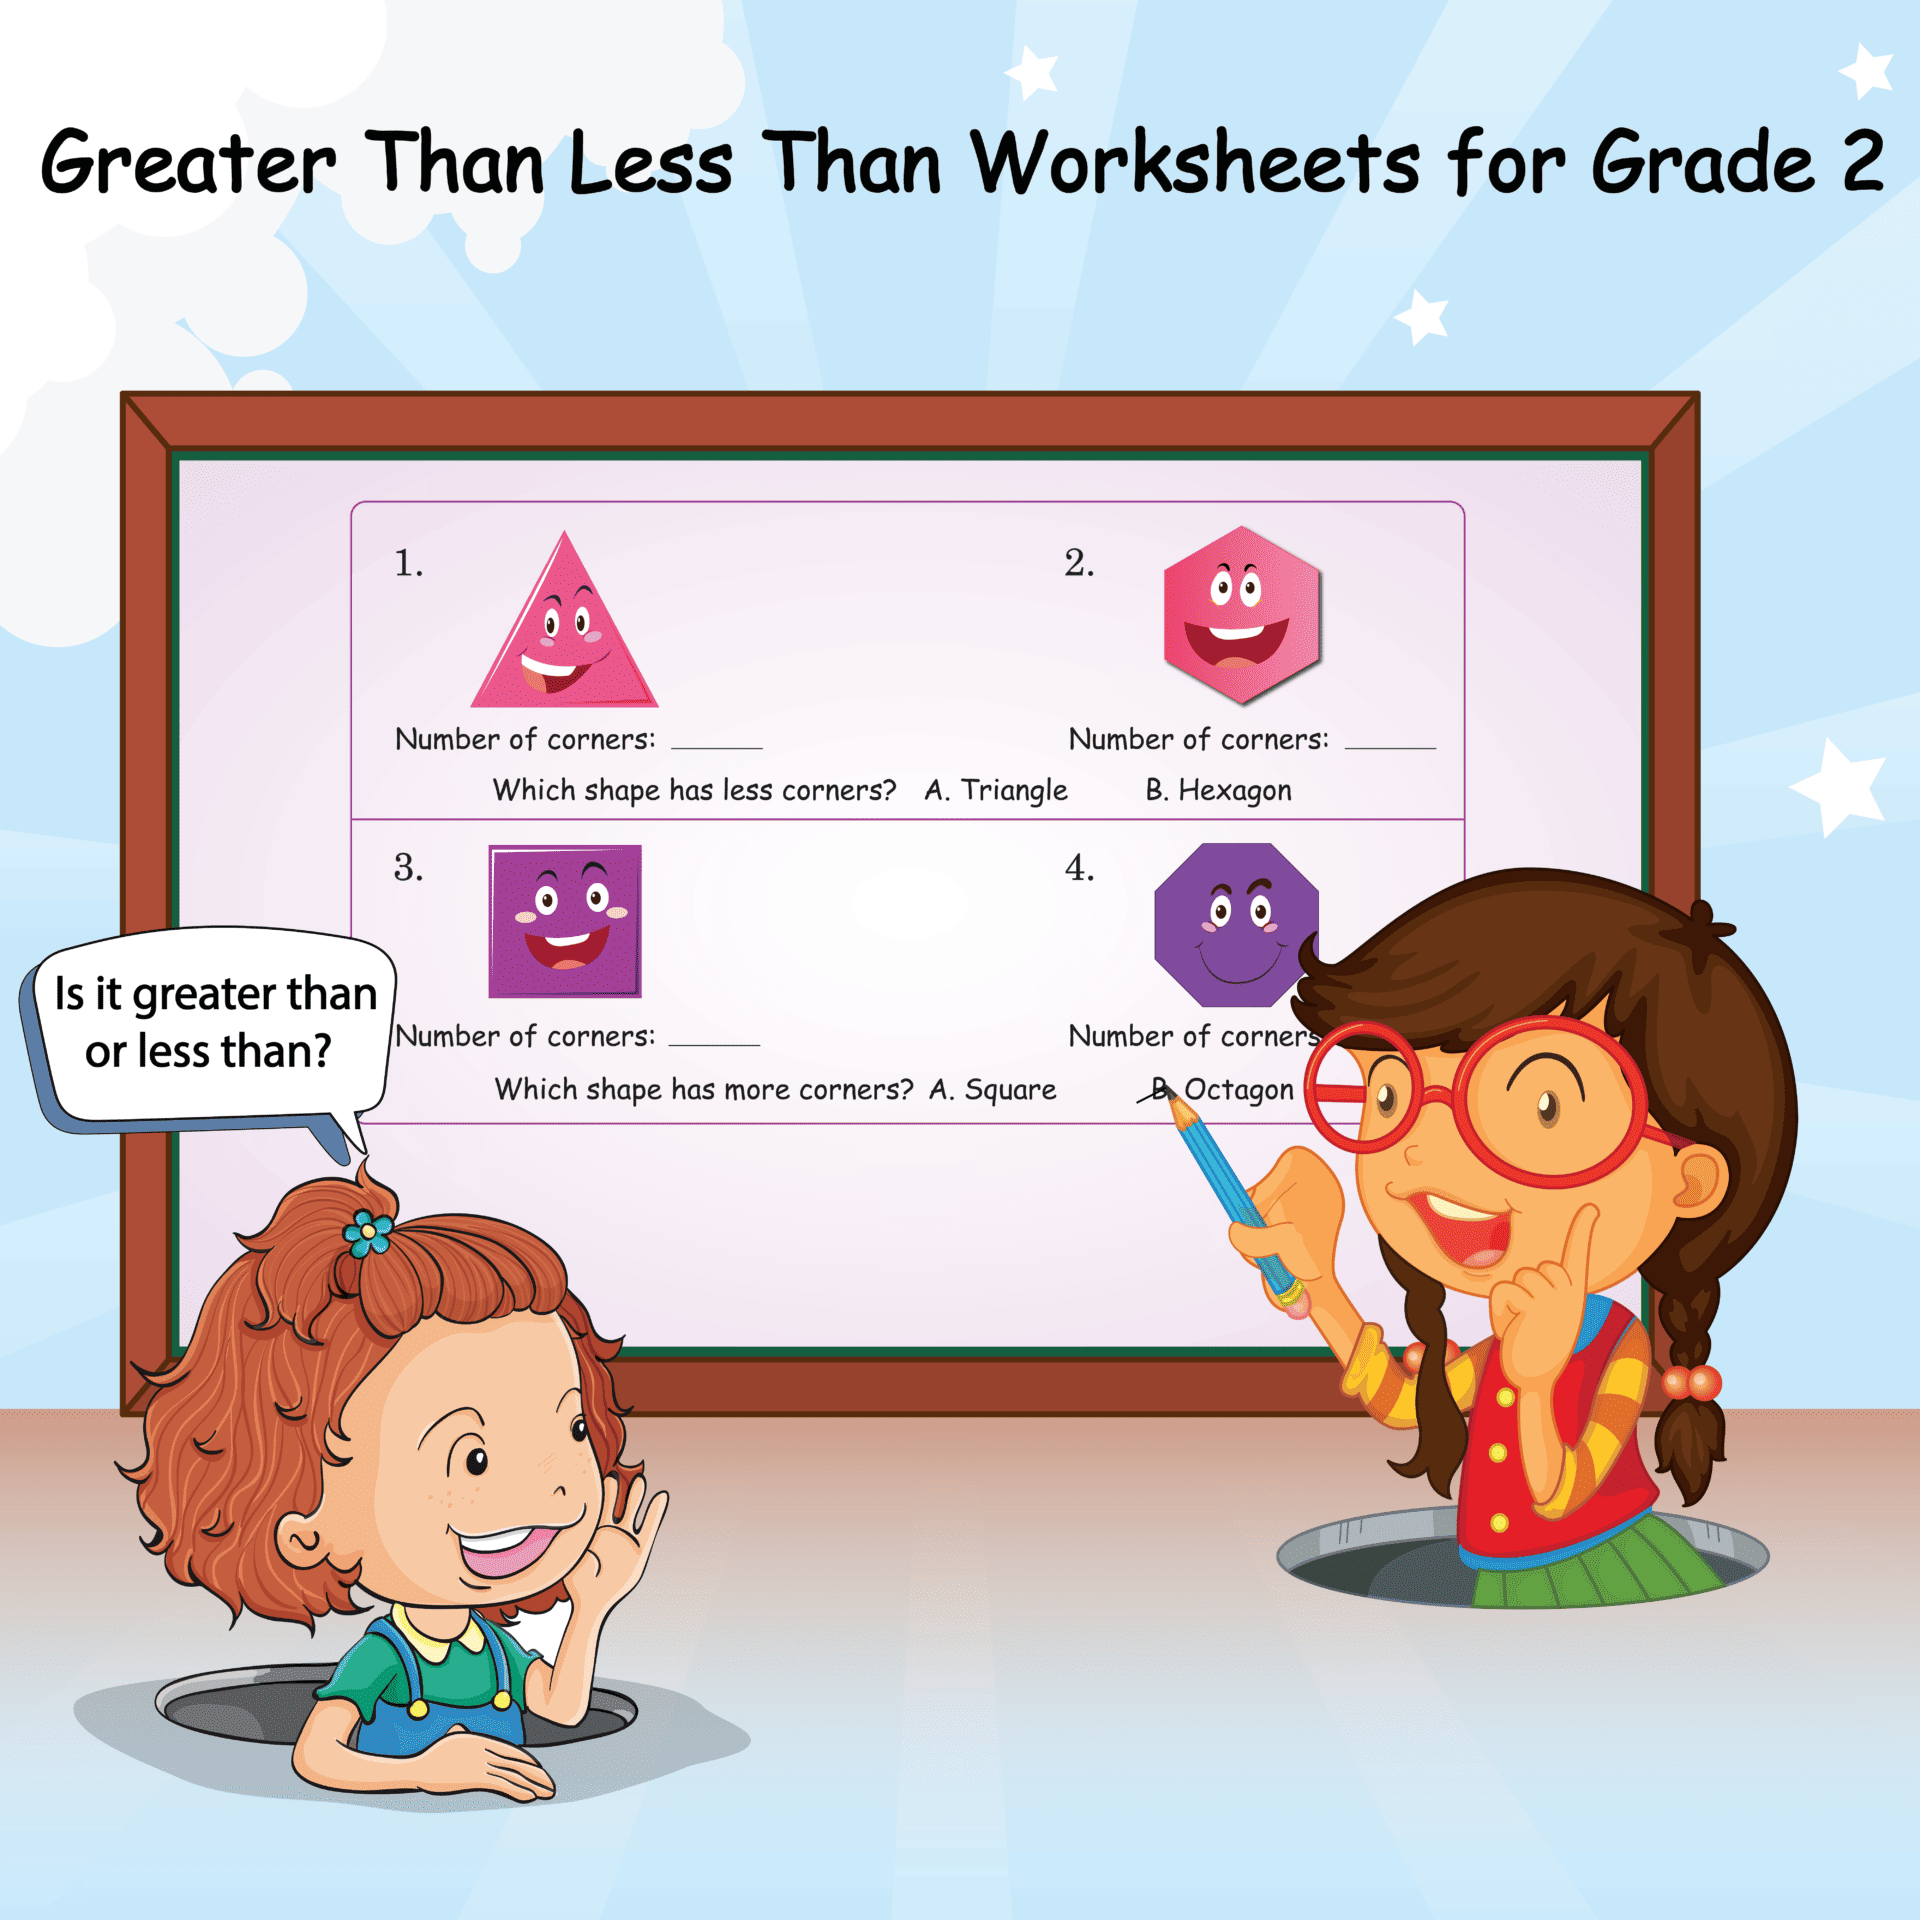 Greater Than Less Than Worksheets for Grade 2